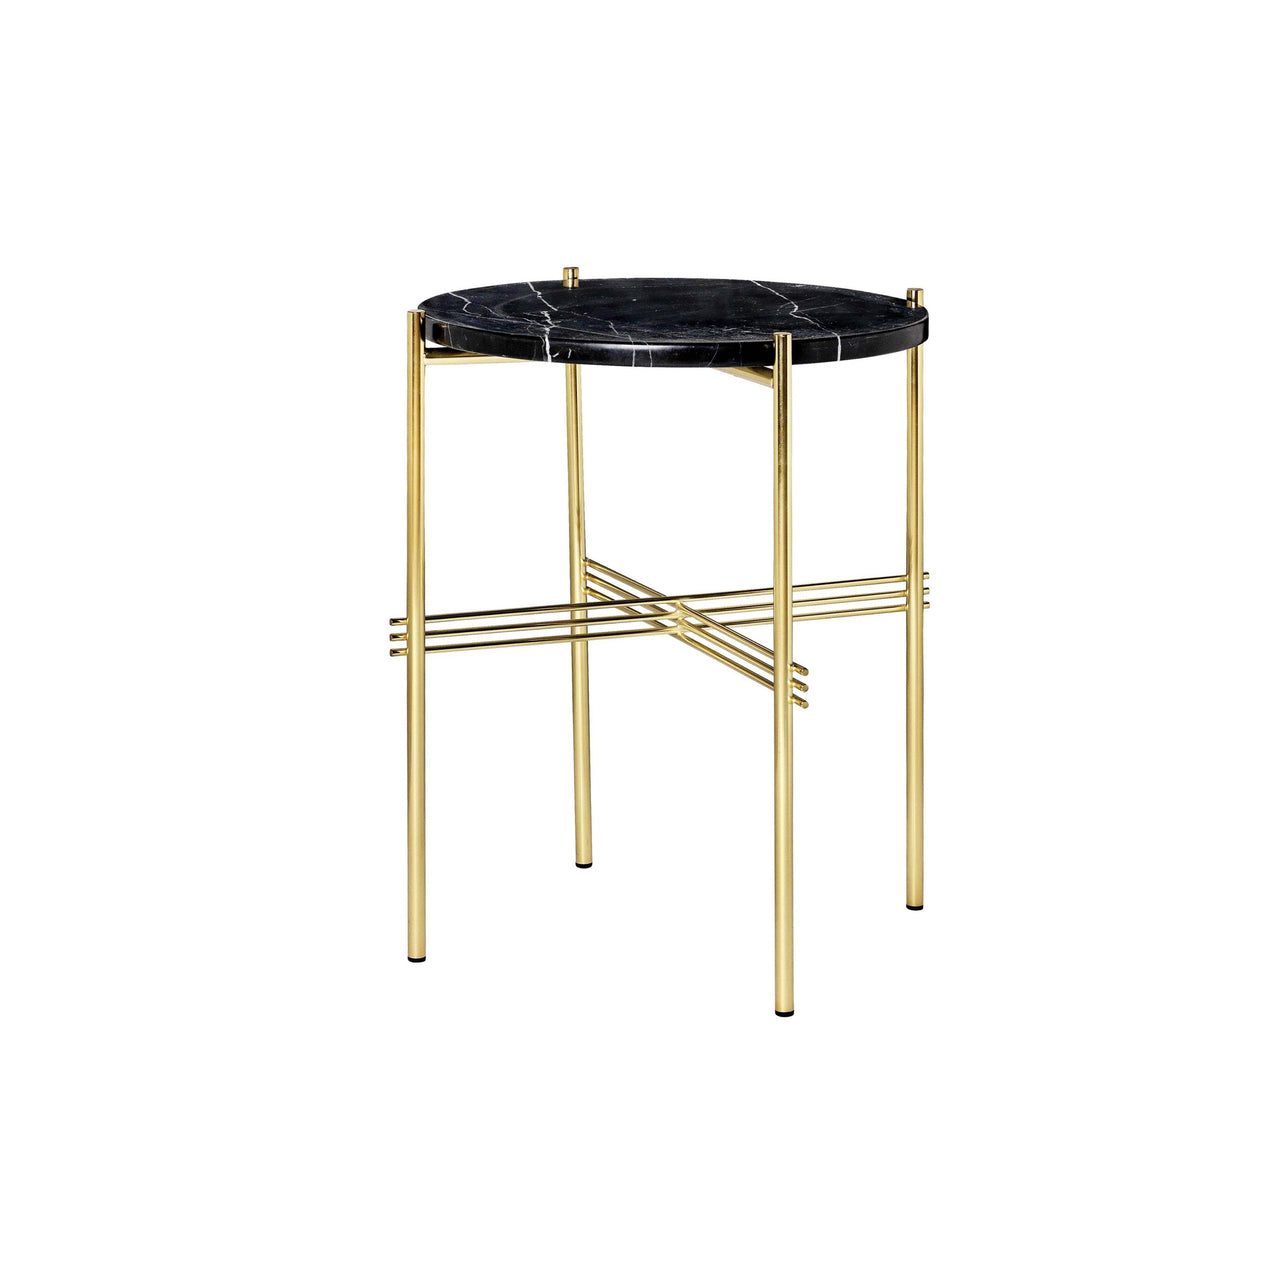 TS Round Side Table: Brass + Black Marquina Marble